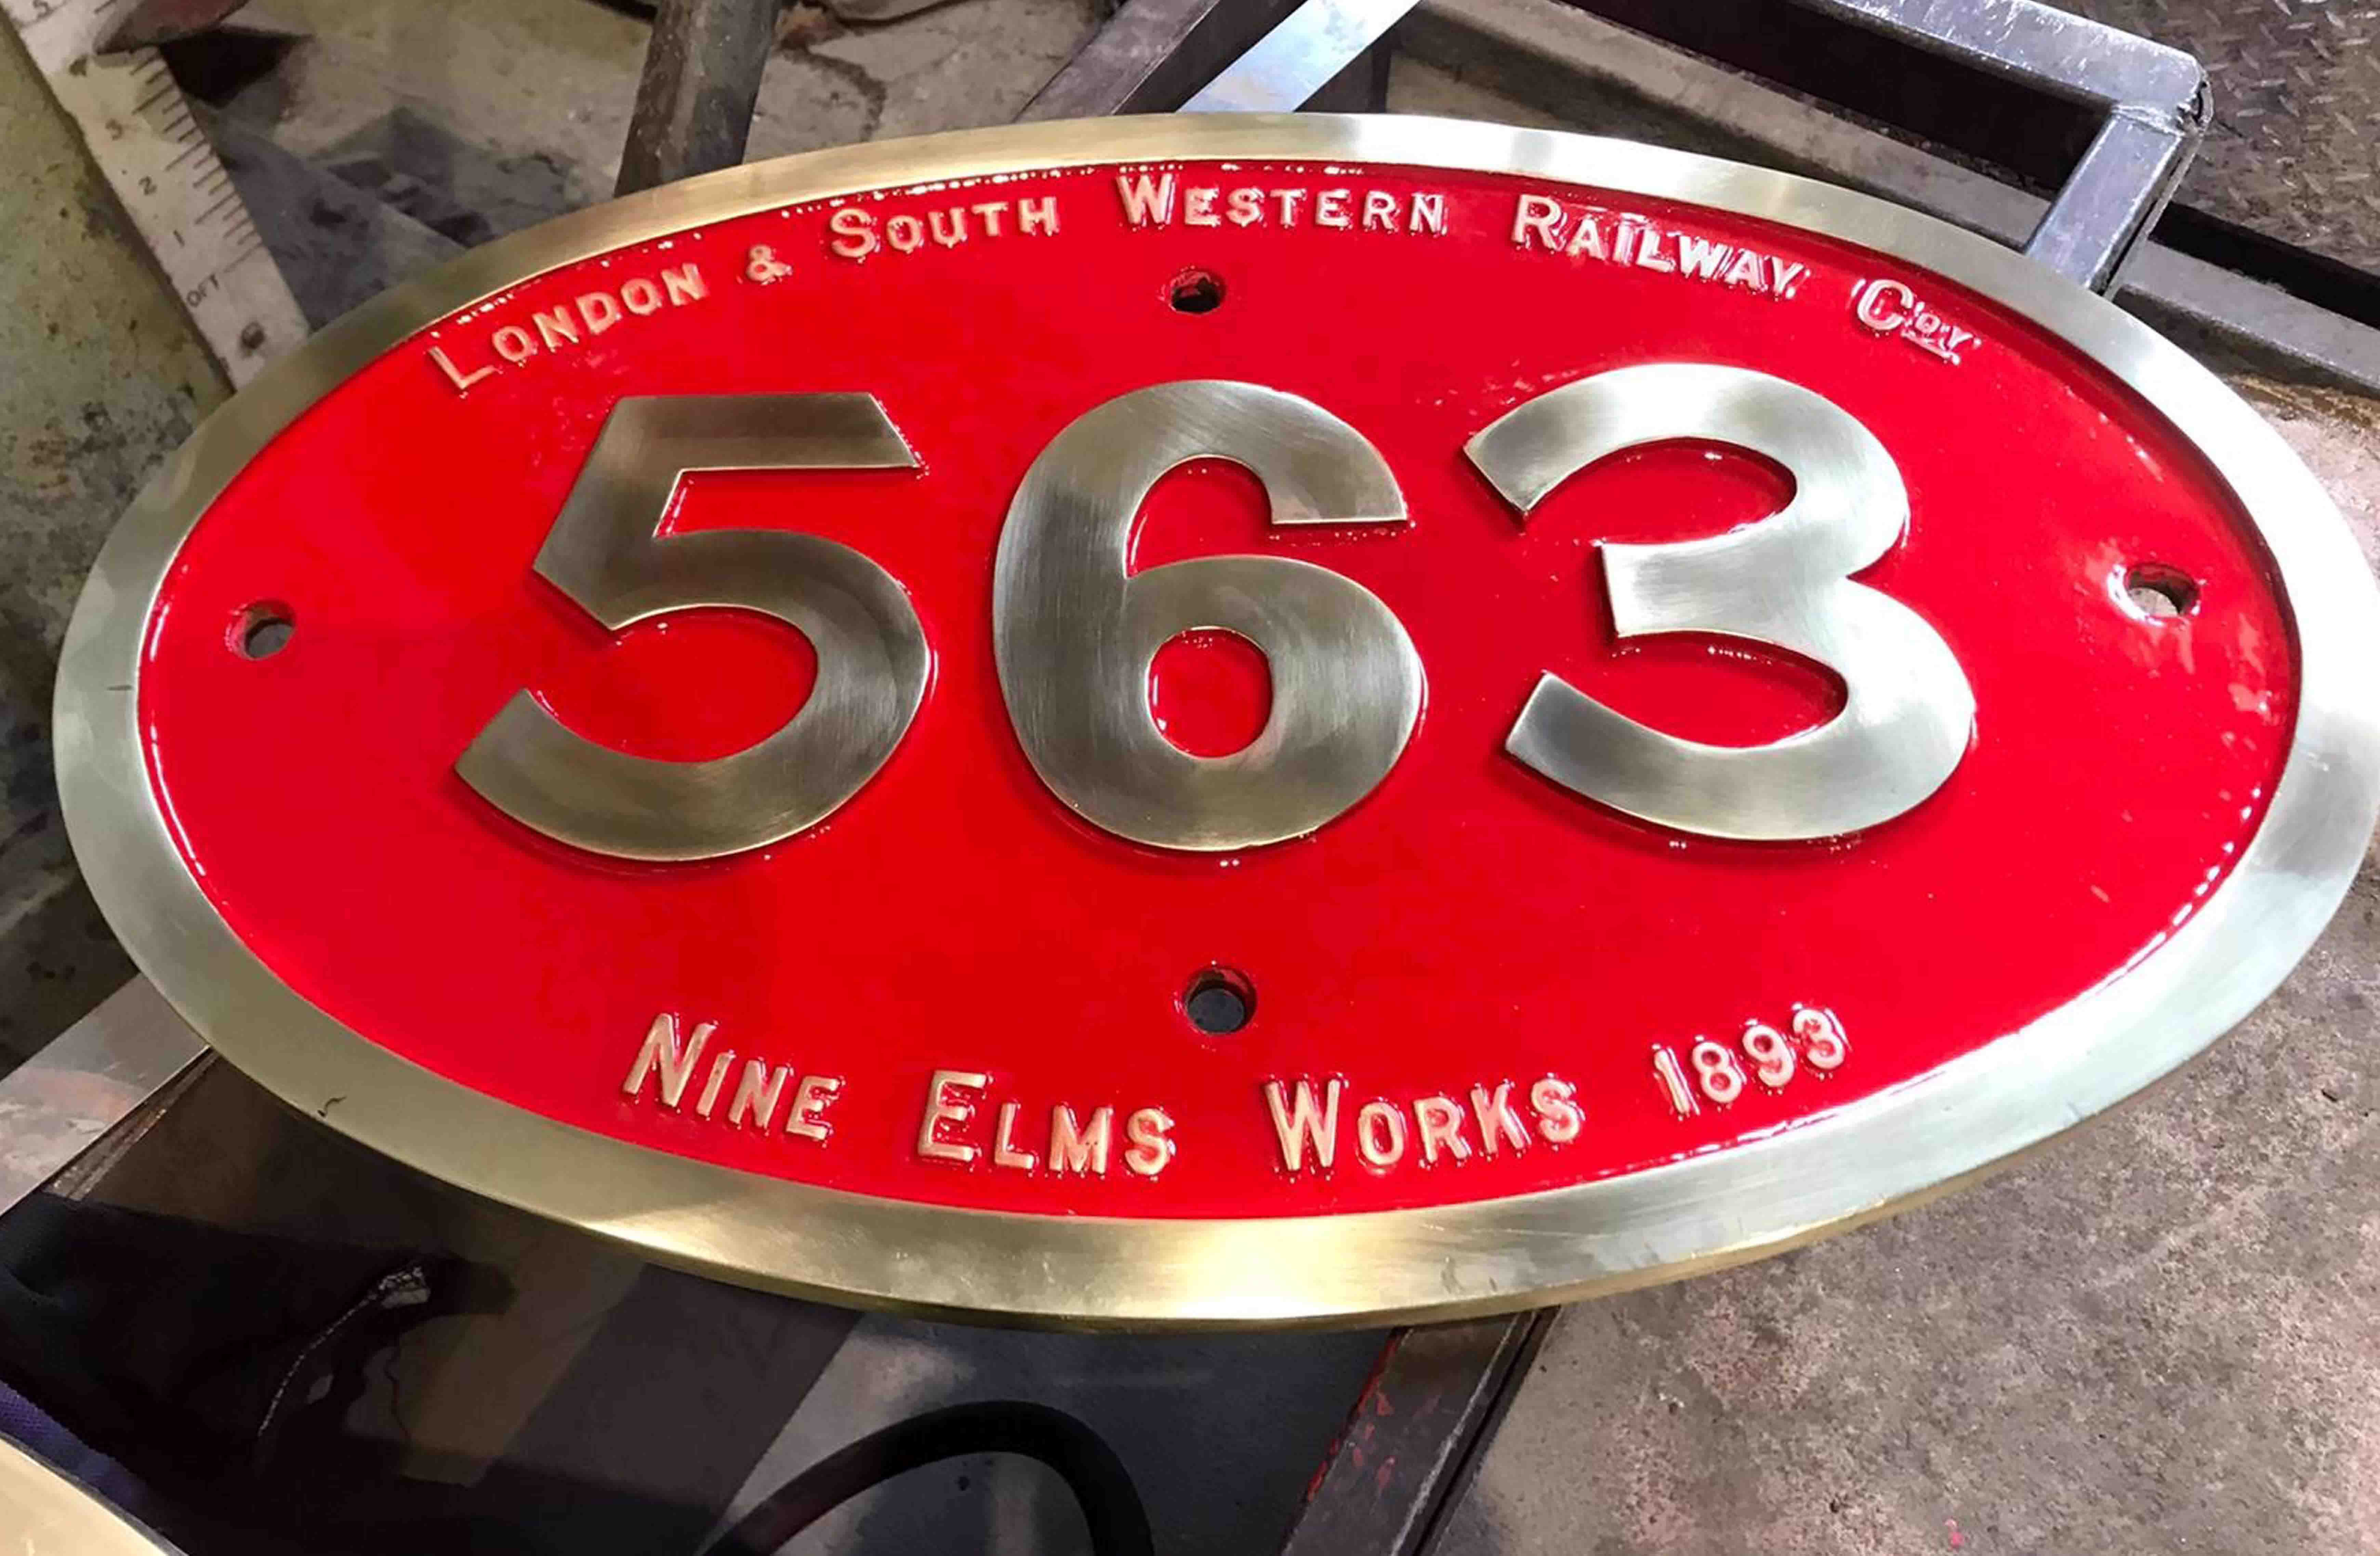 The boiler plate of the T3 No. 563 engine